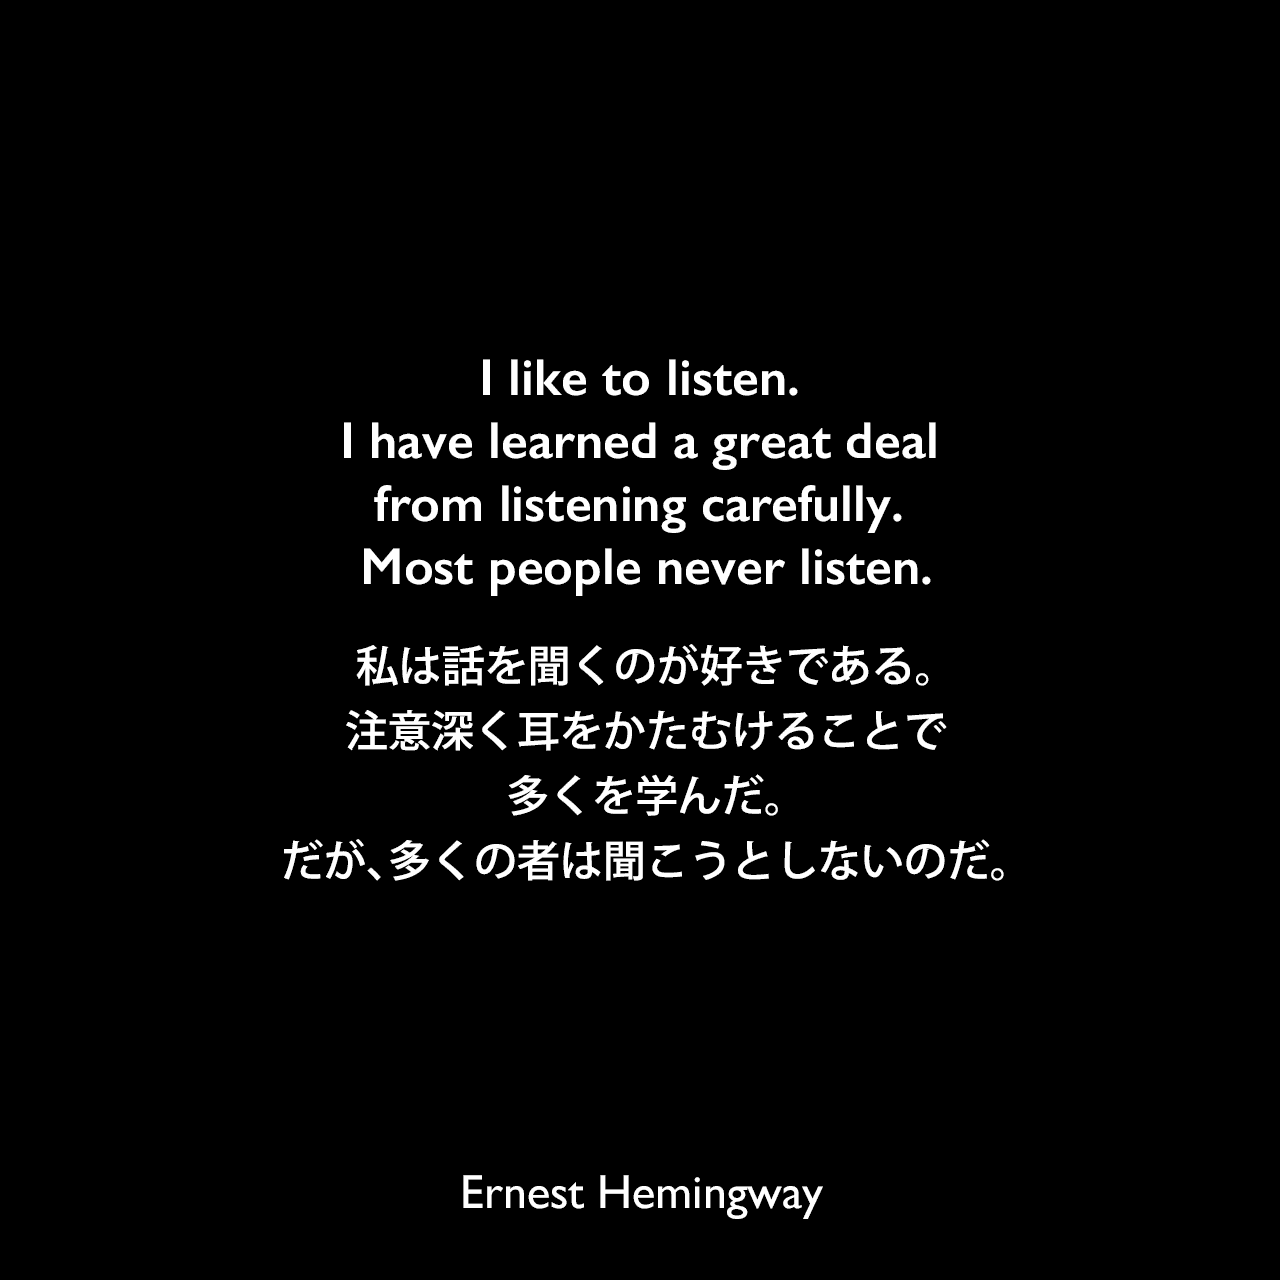 I like to listen. I have learned a great deal from listening carefully. Most people never listen.私は話を聞くのが好きである。注意深く耳をかたむけることで、多くを学んだ。だが、多くの者は聞こうとしないのだ。Ernest Hemingway